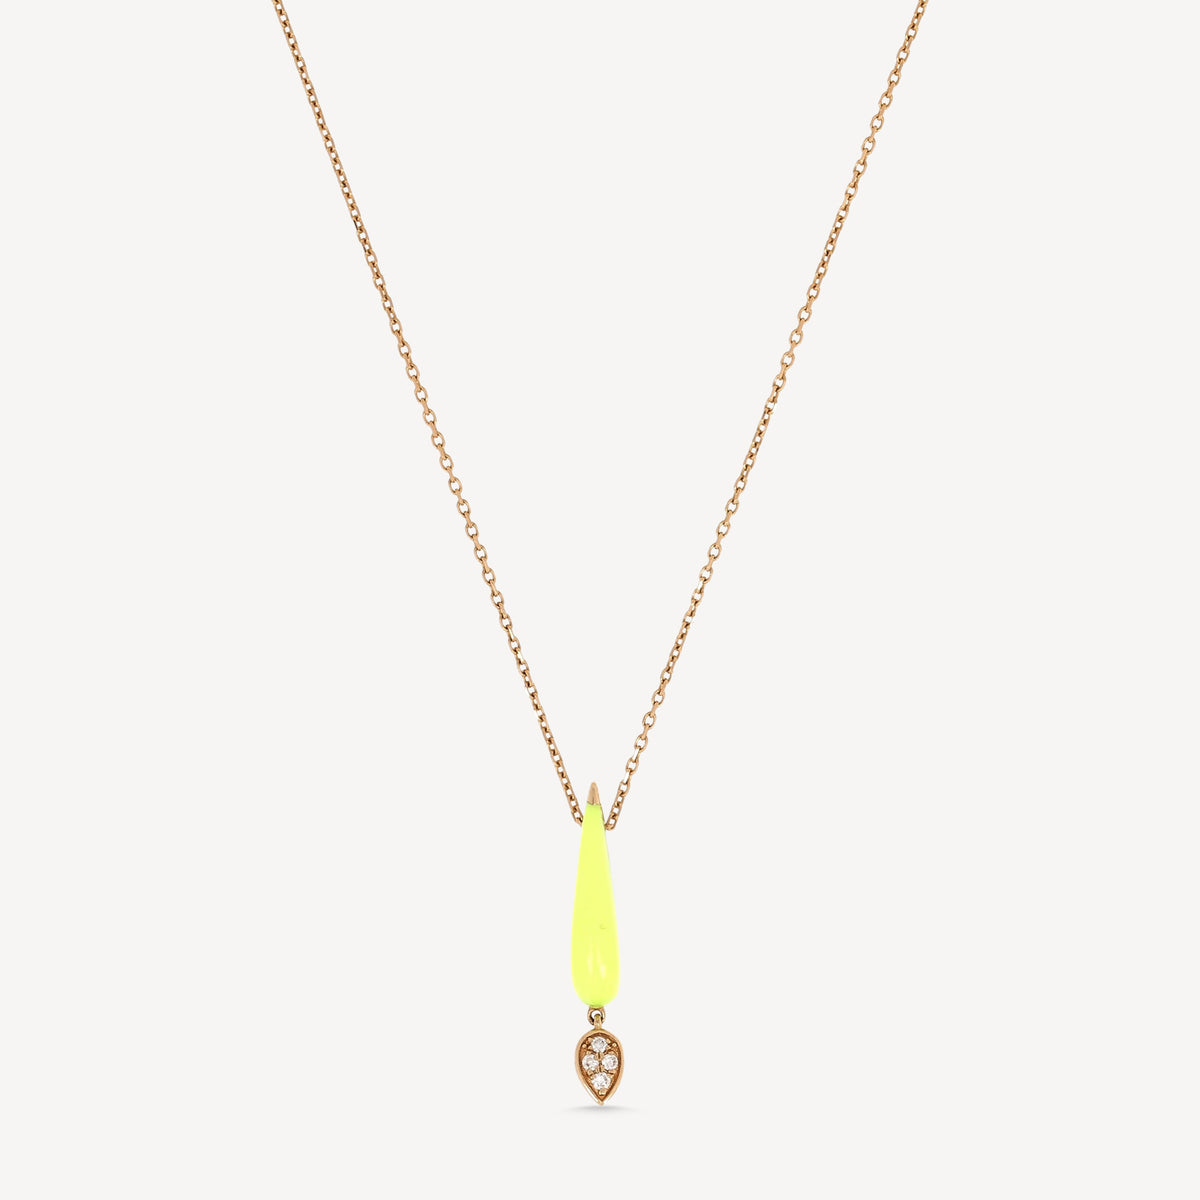 Mini Drop Necklace in Neon Yellow